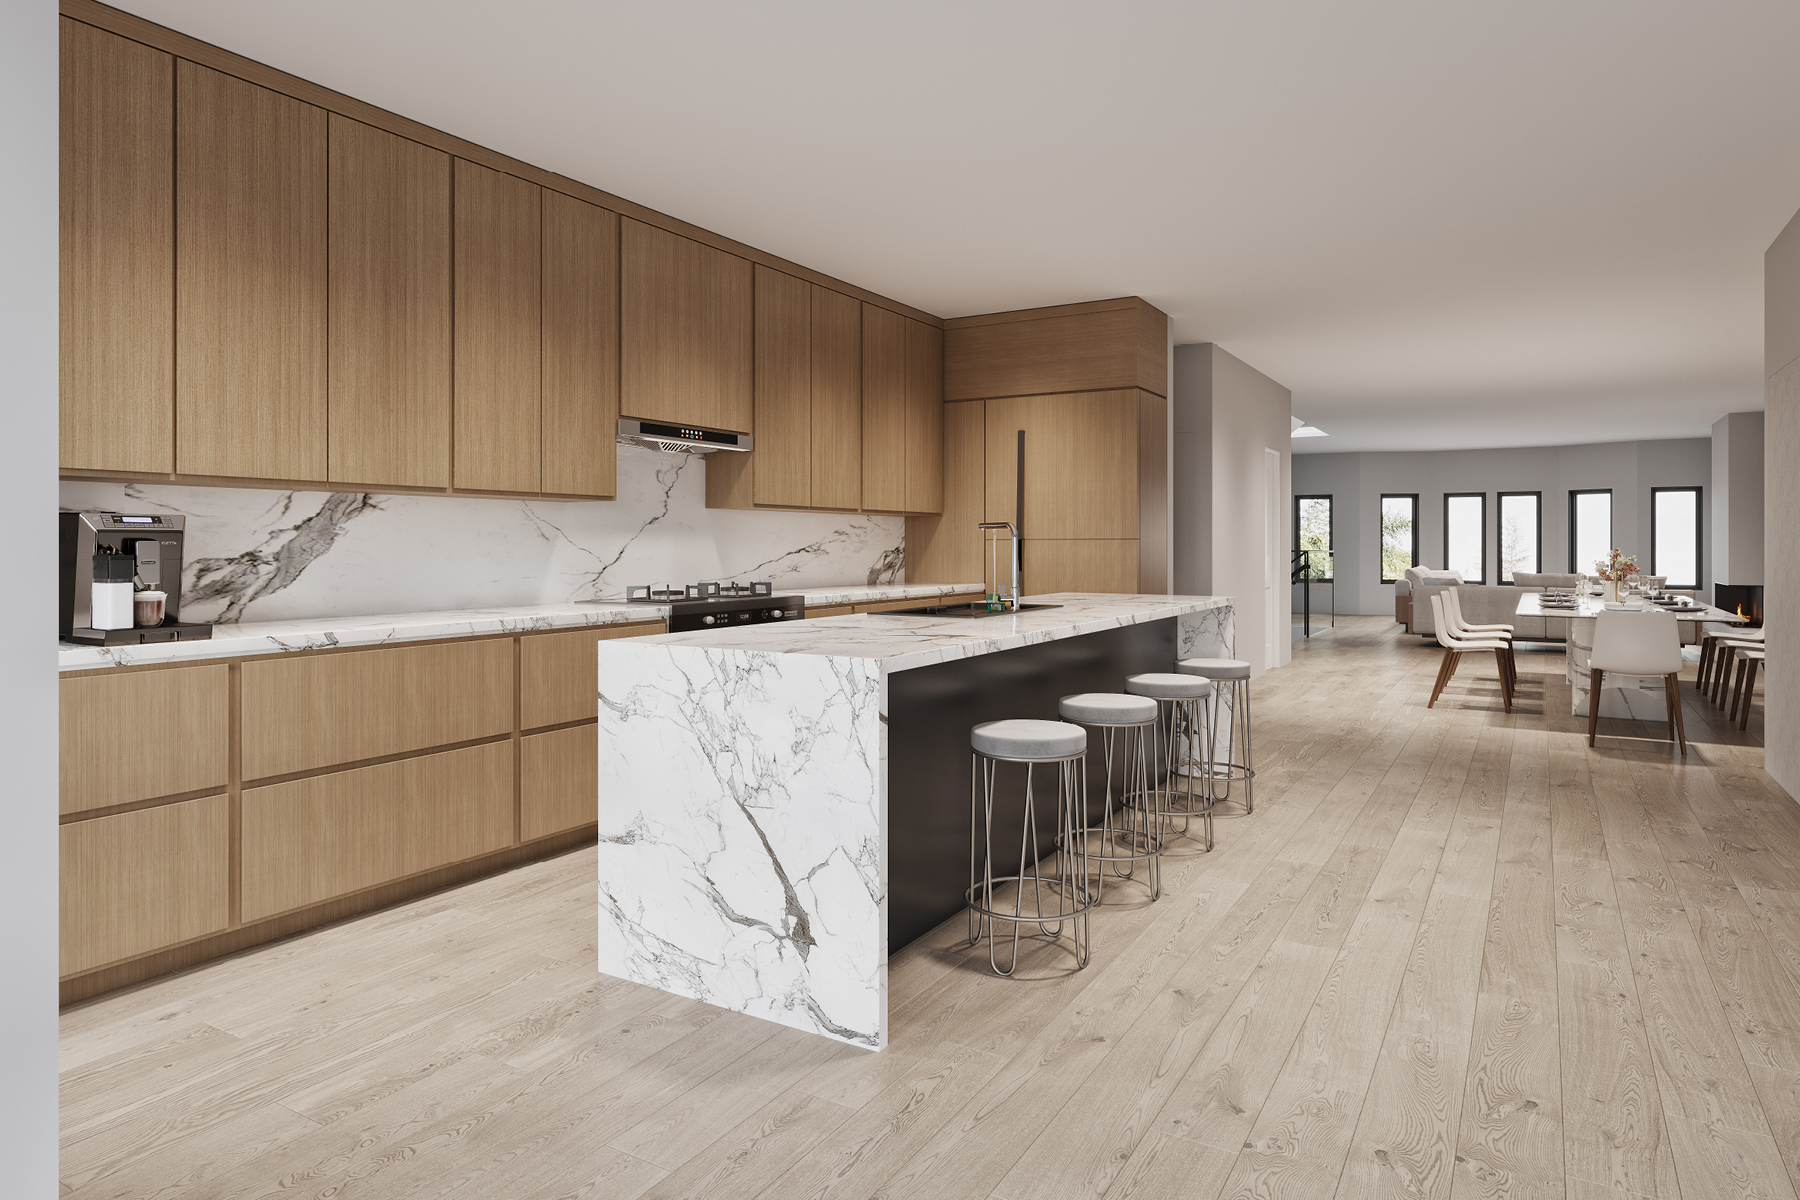 Rendering of kitchen to dining/living